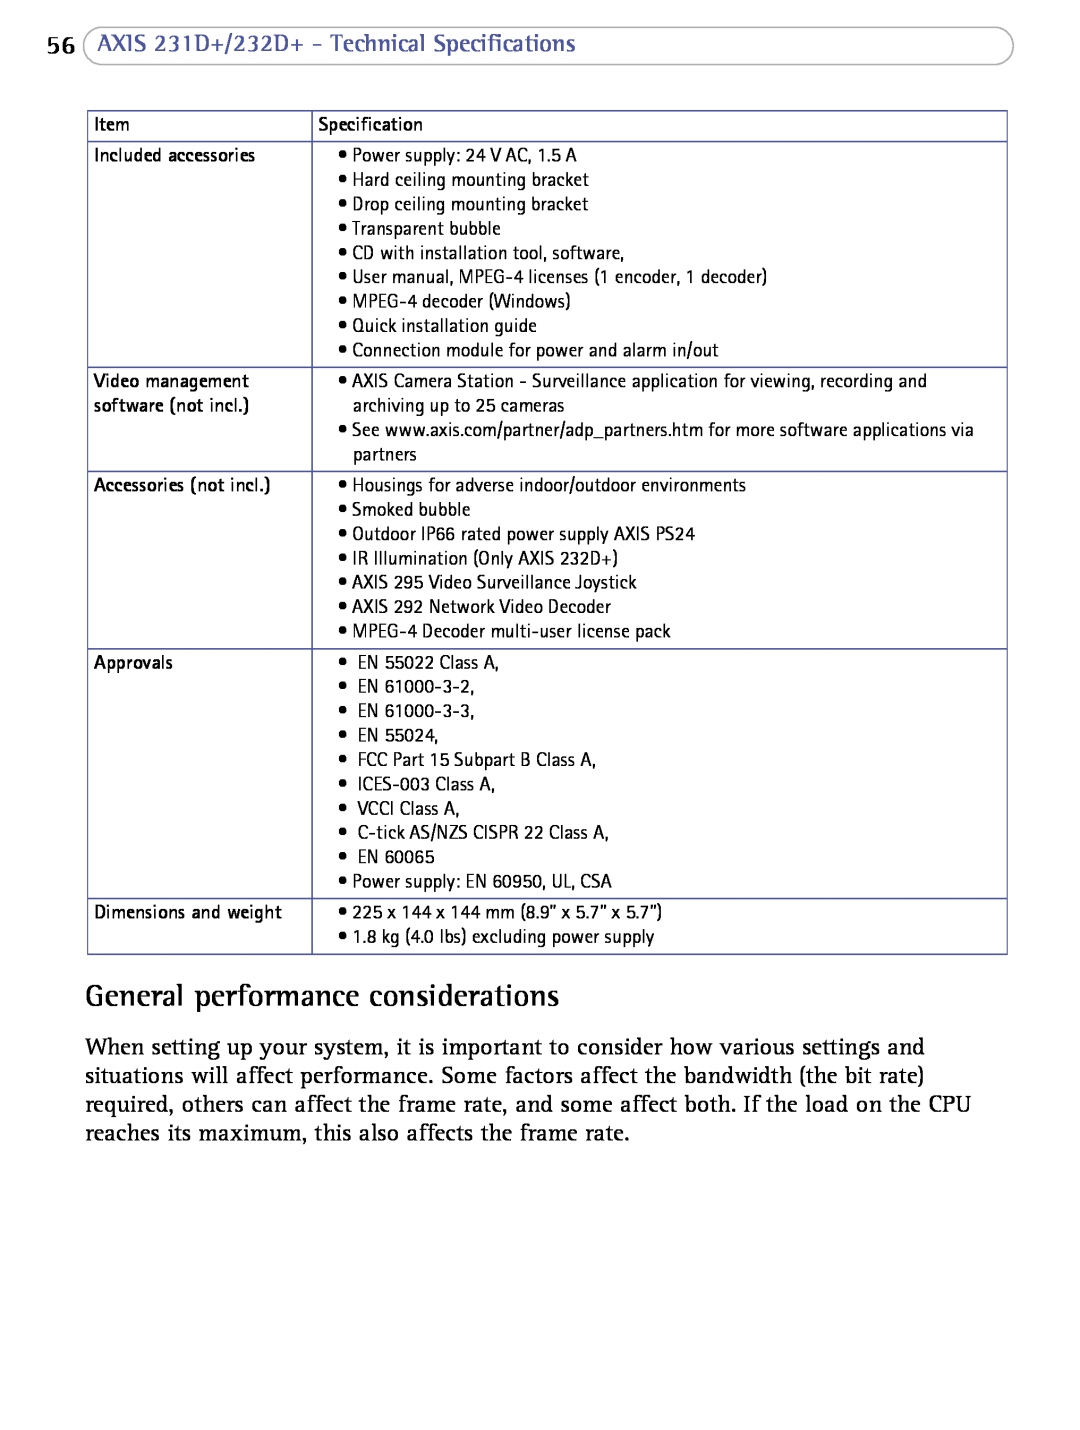 Axis Communications 232d+ user manual General performance considerations, 56AXIS 231D+/232D+ - Technical Specifications 